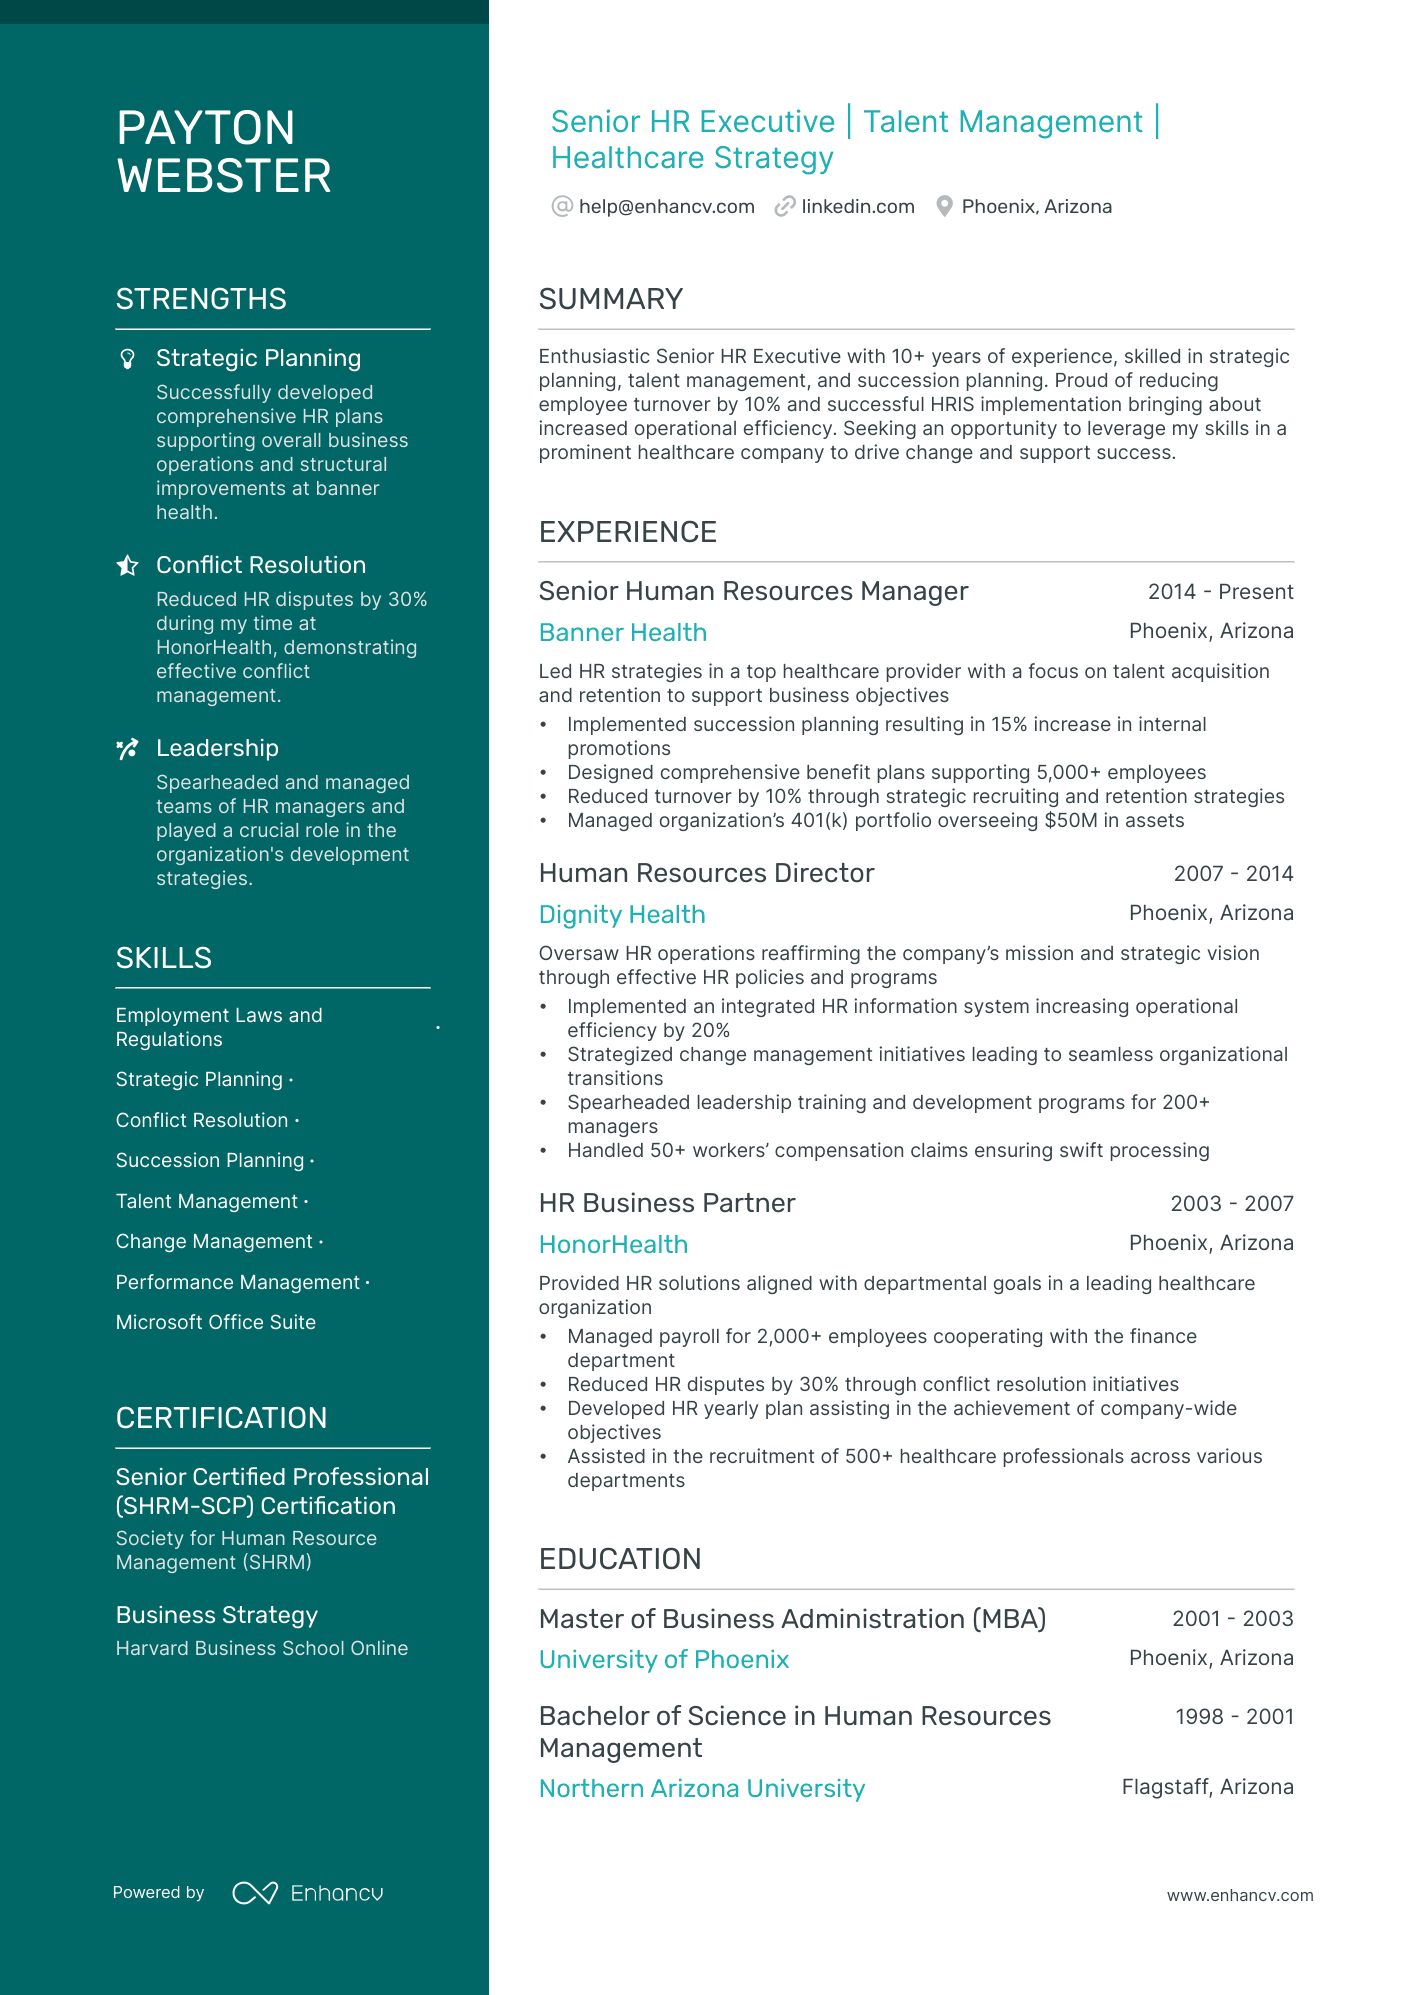 Chief Human Resources Officer resume example